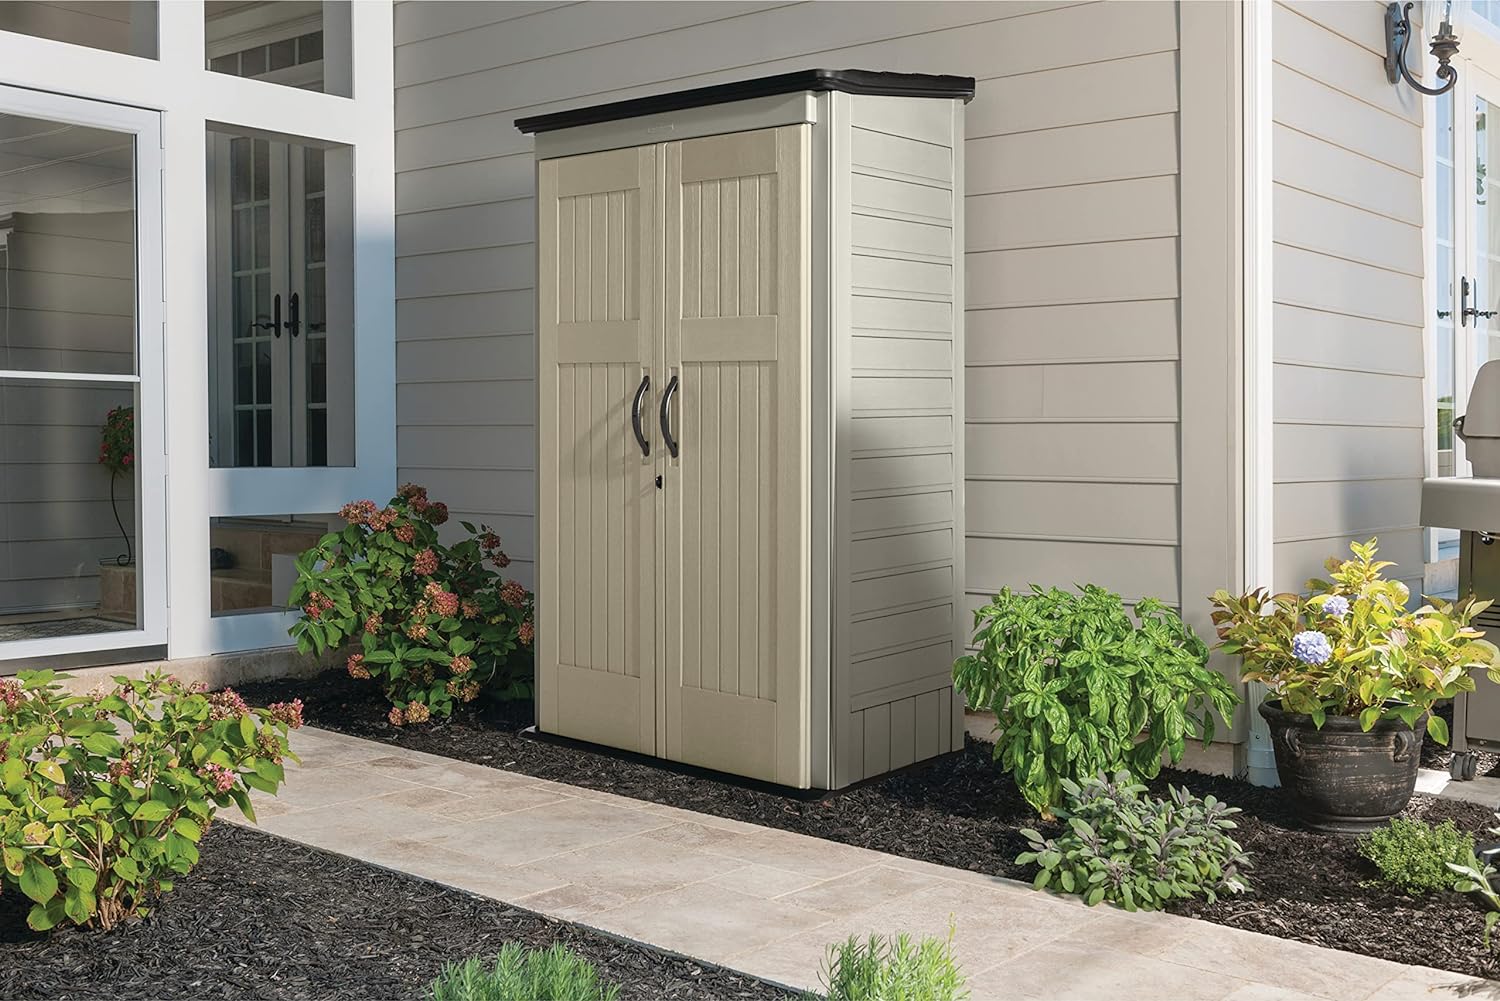 Rubbermaid 5x2 storage shed